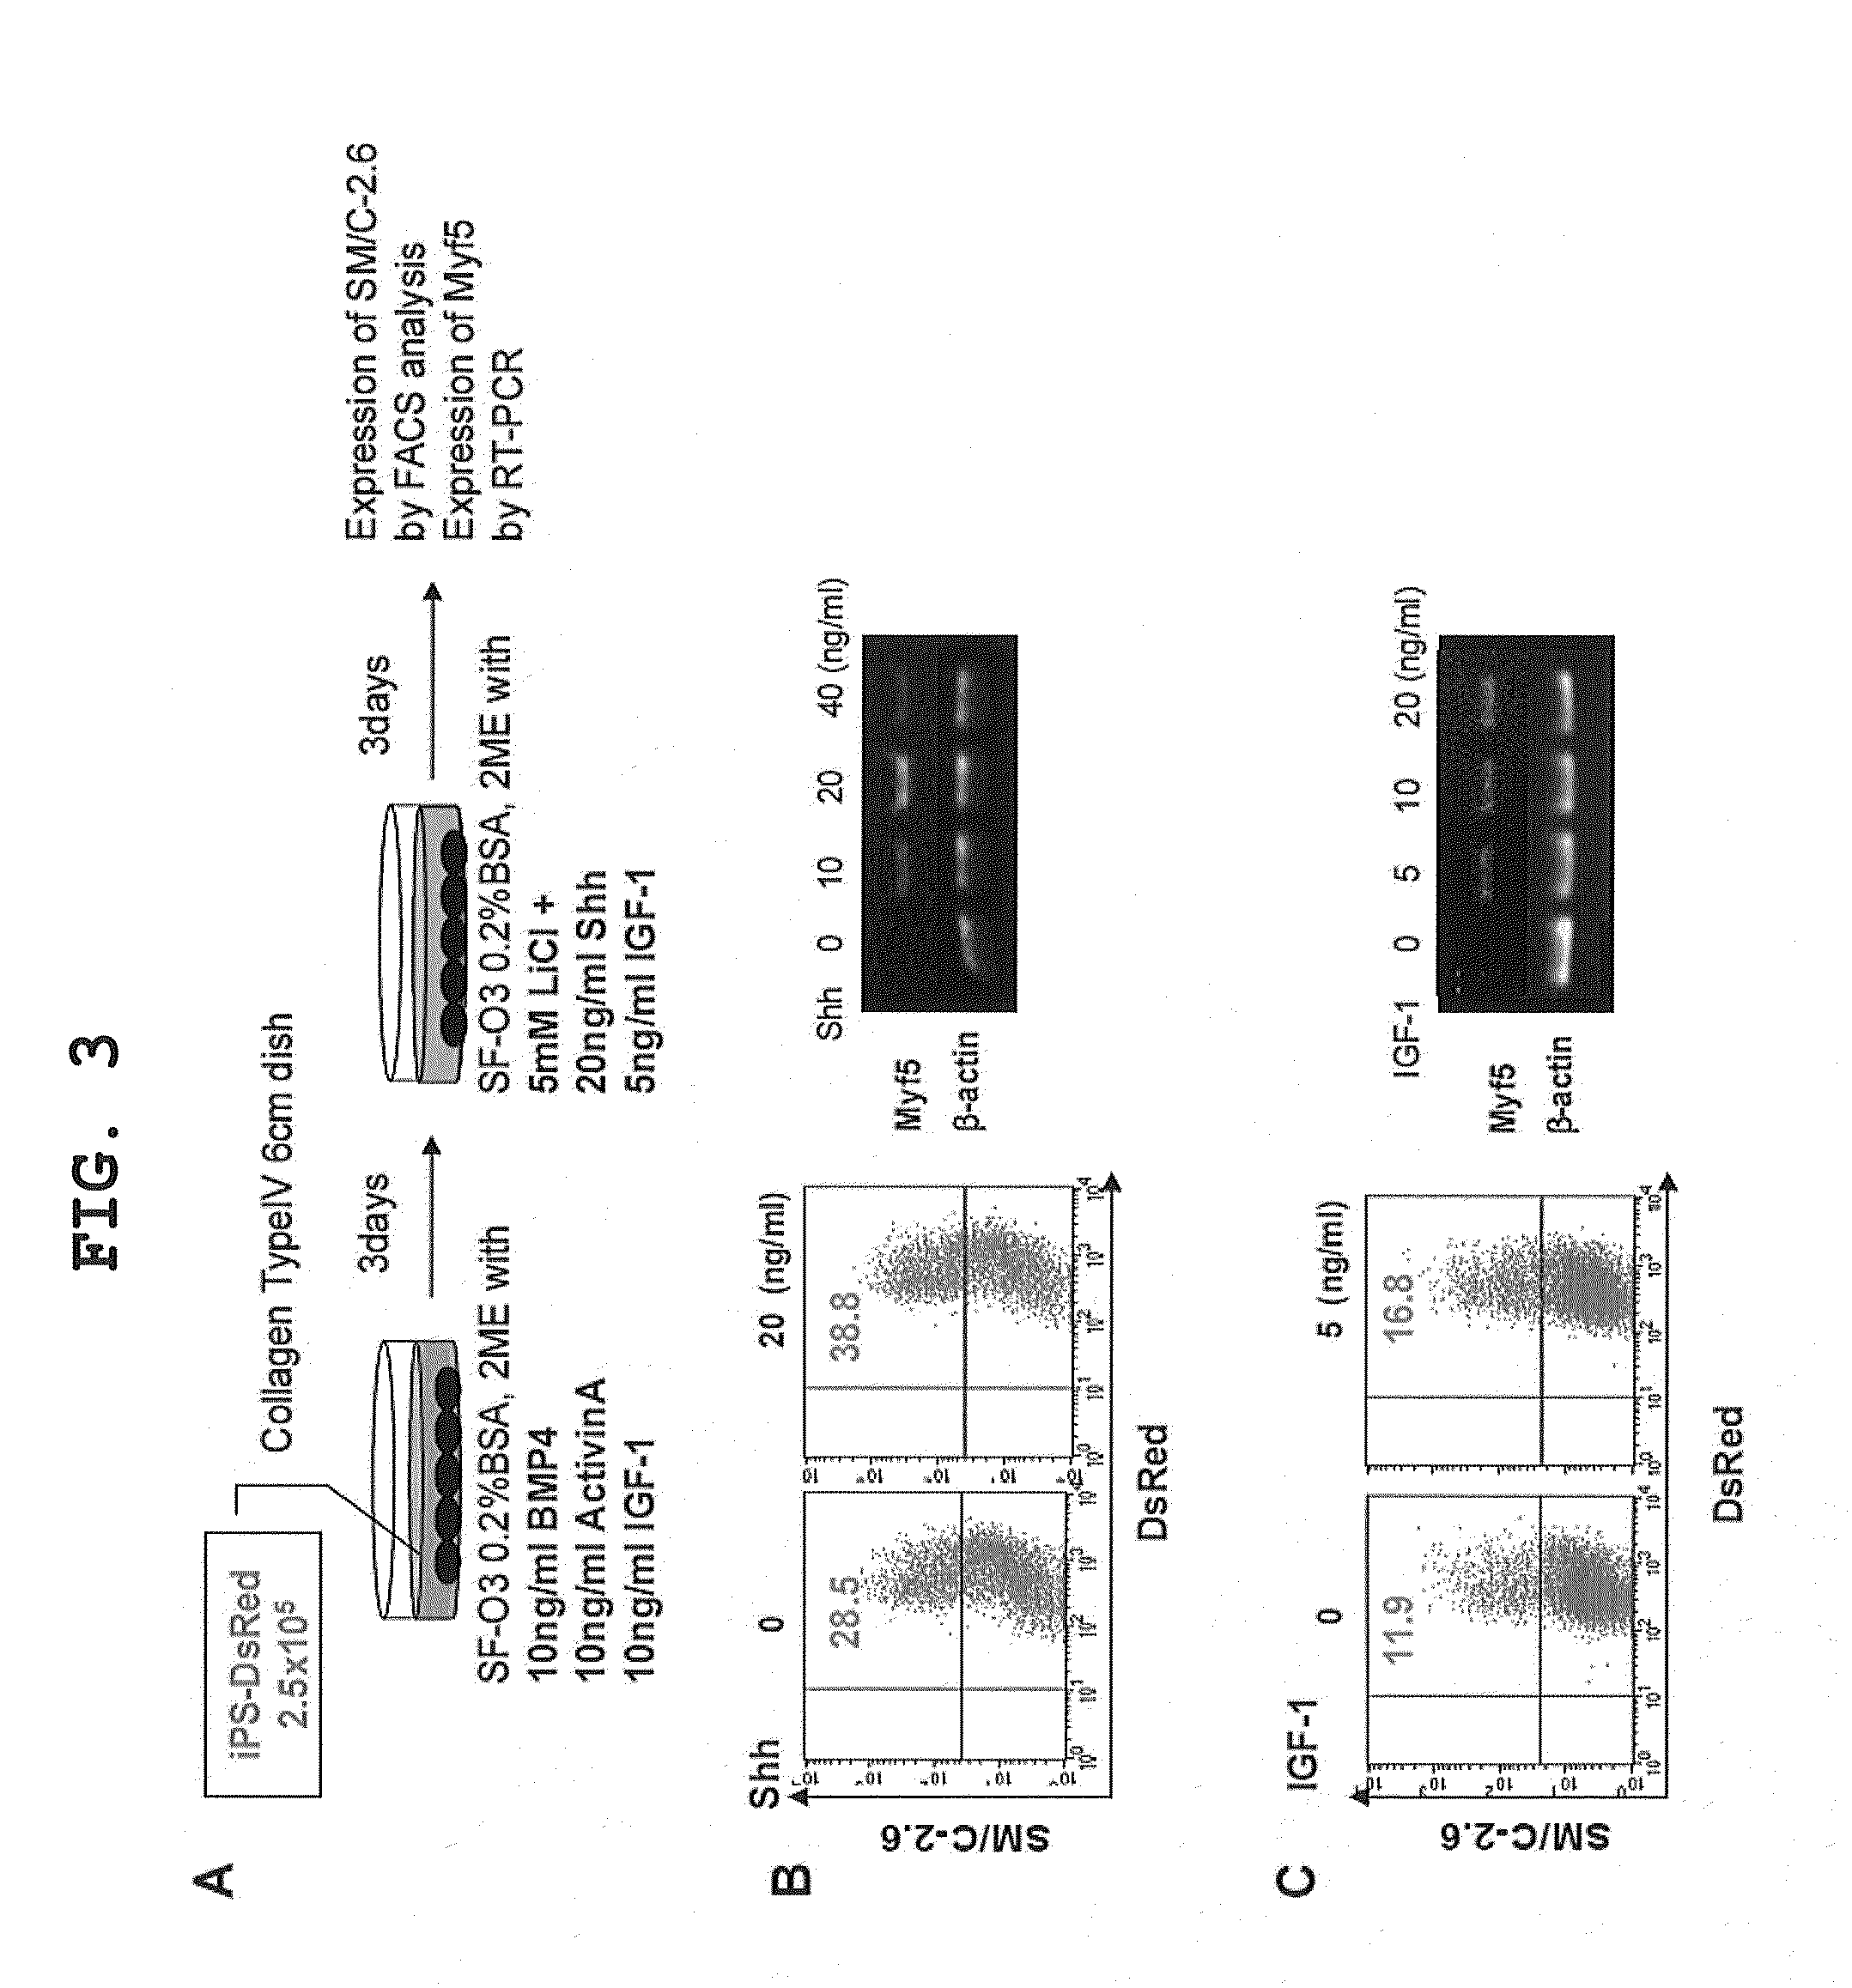 Method of inducing differentiation from pluripotent stem cells to skeletal muscle progenitor cells